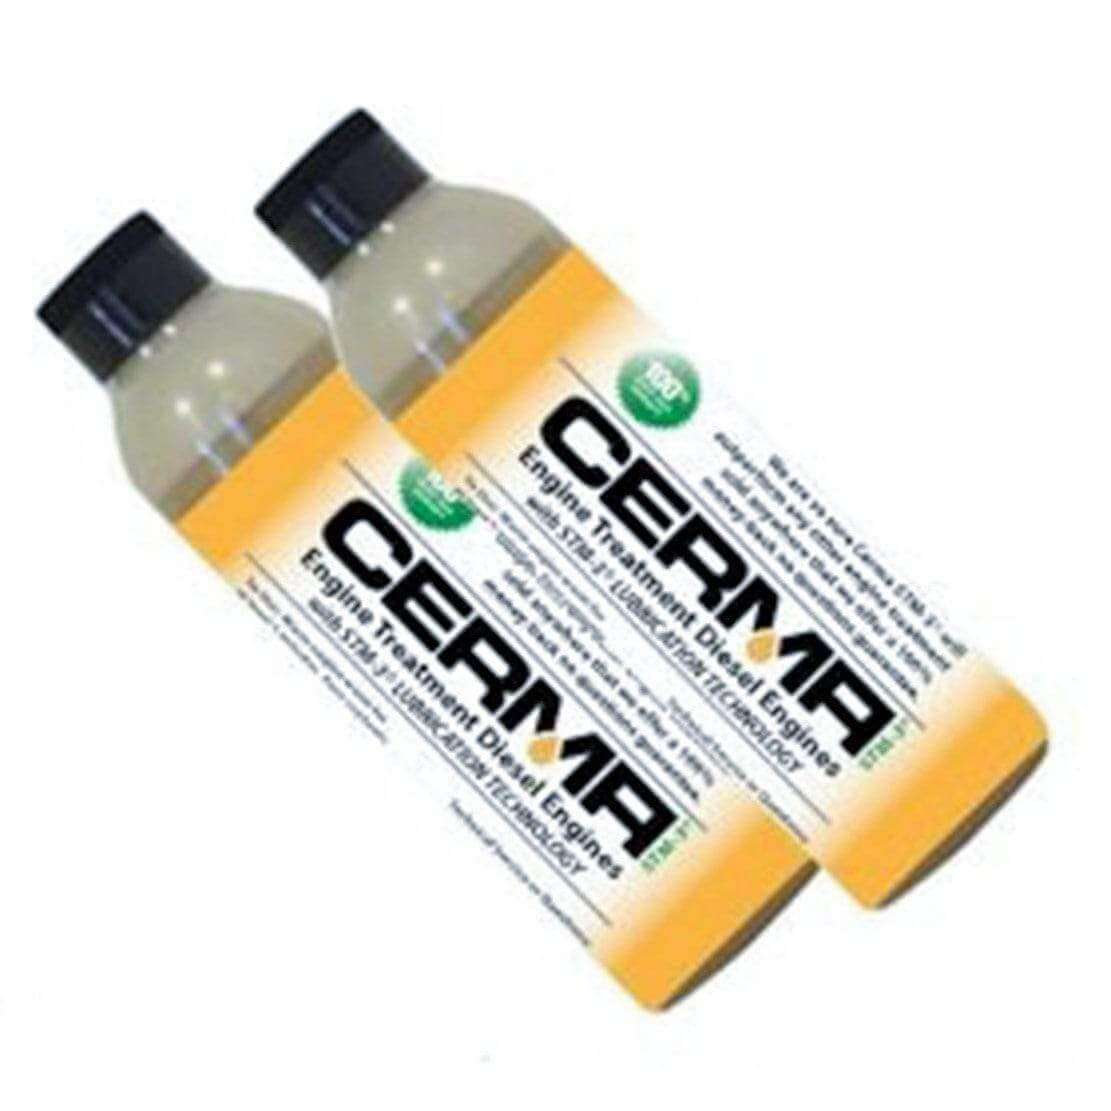 Cerma Ceramic Engine Treatment for Diesel Trucks at $538.45 only from cermatreatment.com